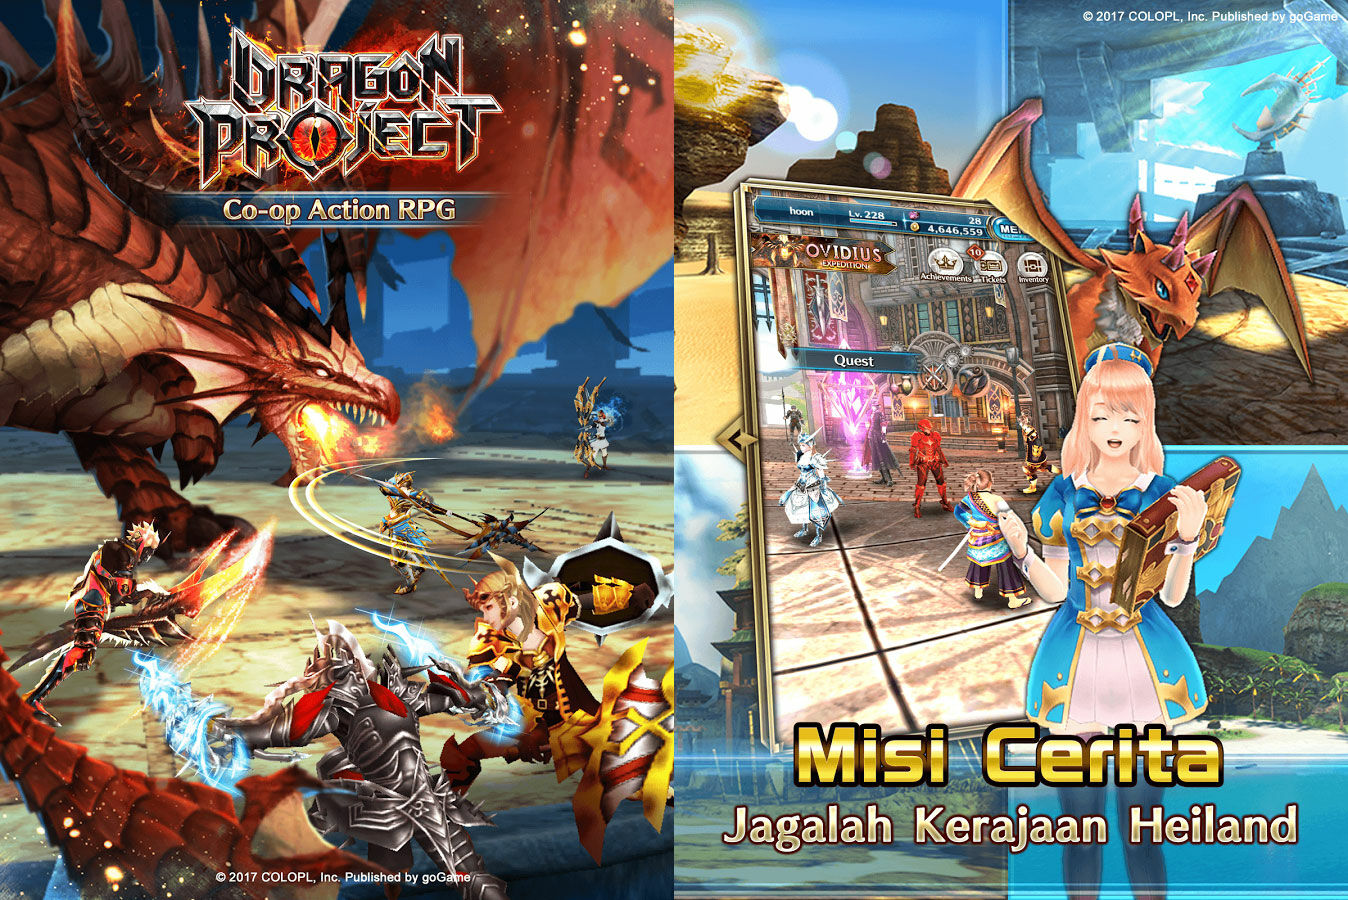 download game gratis android indonesia